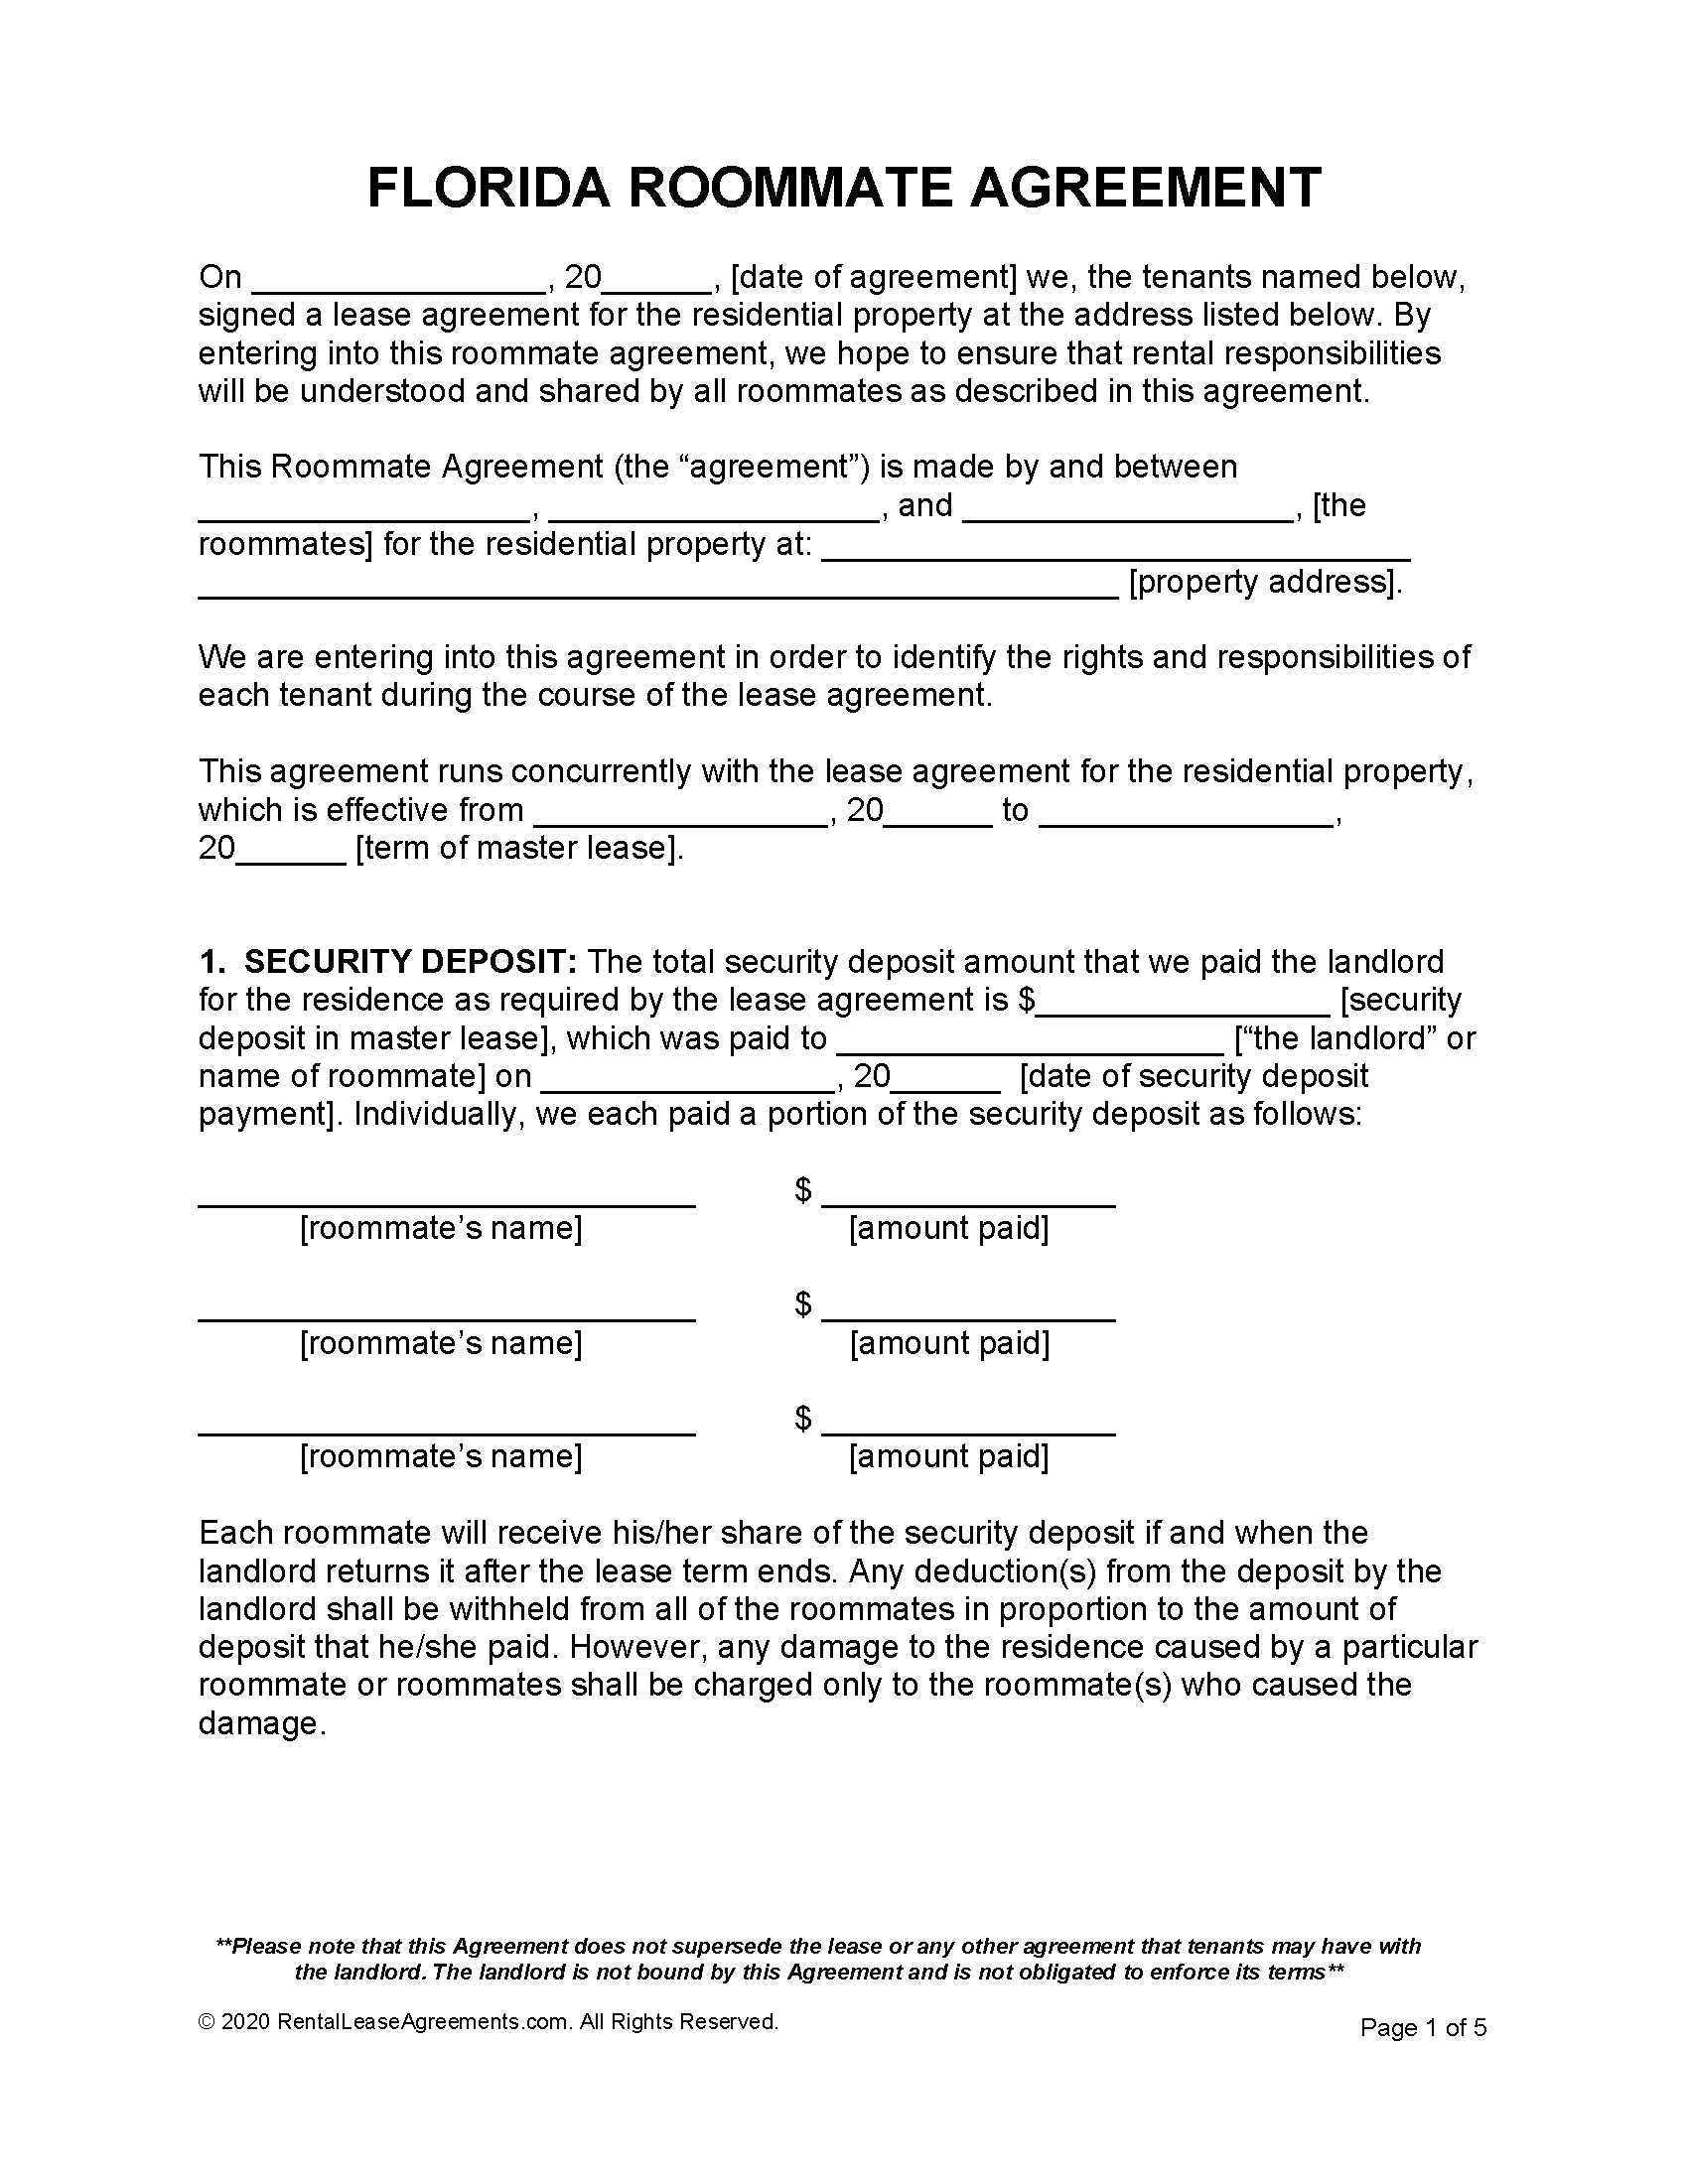 free-florida-roommate-agreement-template-pdf-ms-word